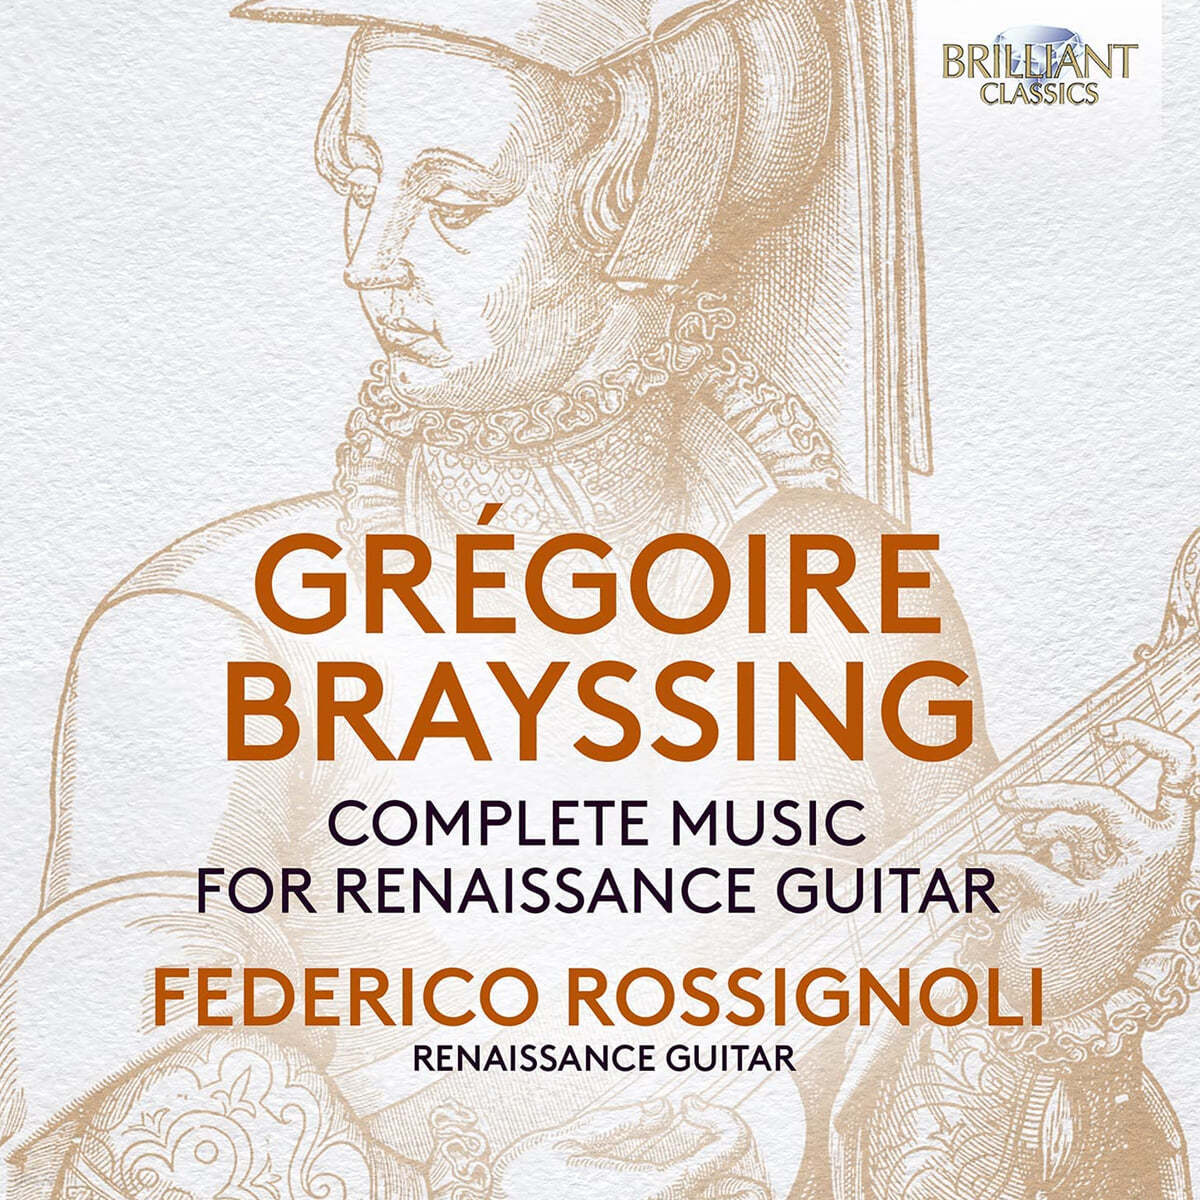 Federico Rossignoli 그레구아 브레싱: 기타를 위한 작곡집 (Gregoire Brayssing: Complete Music For Renaissance Guitar)